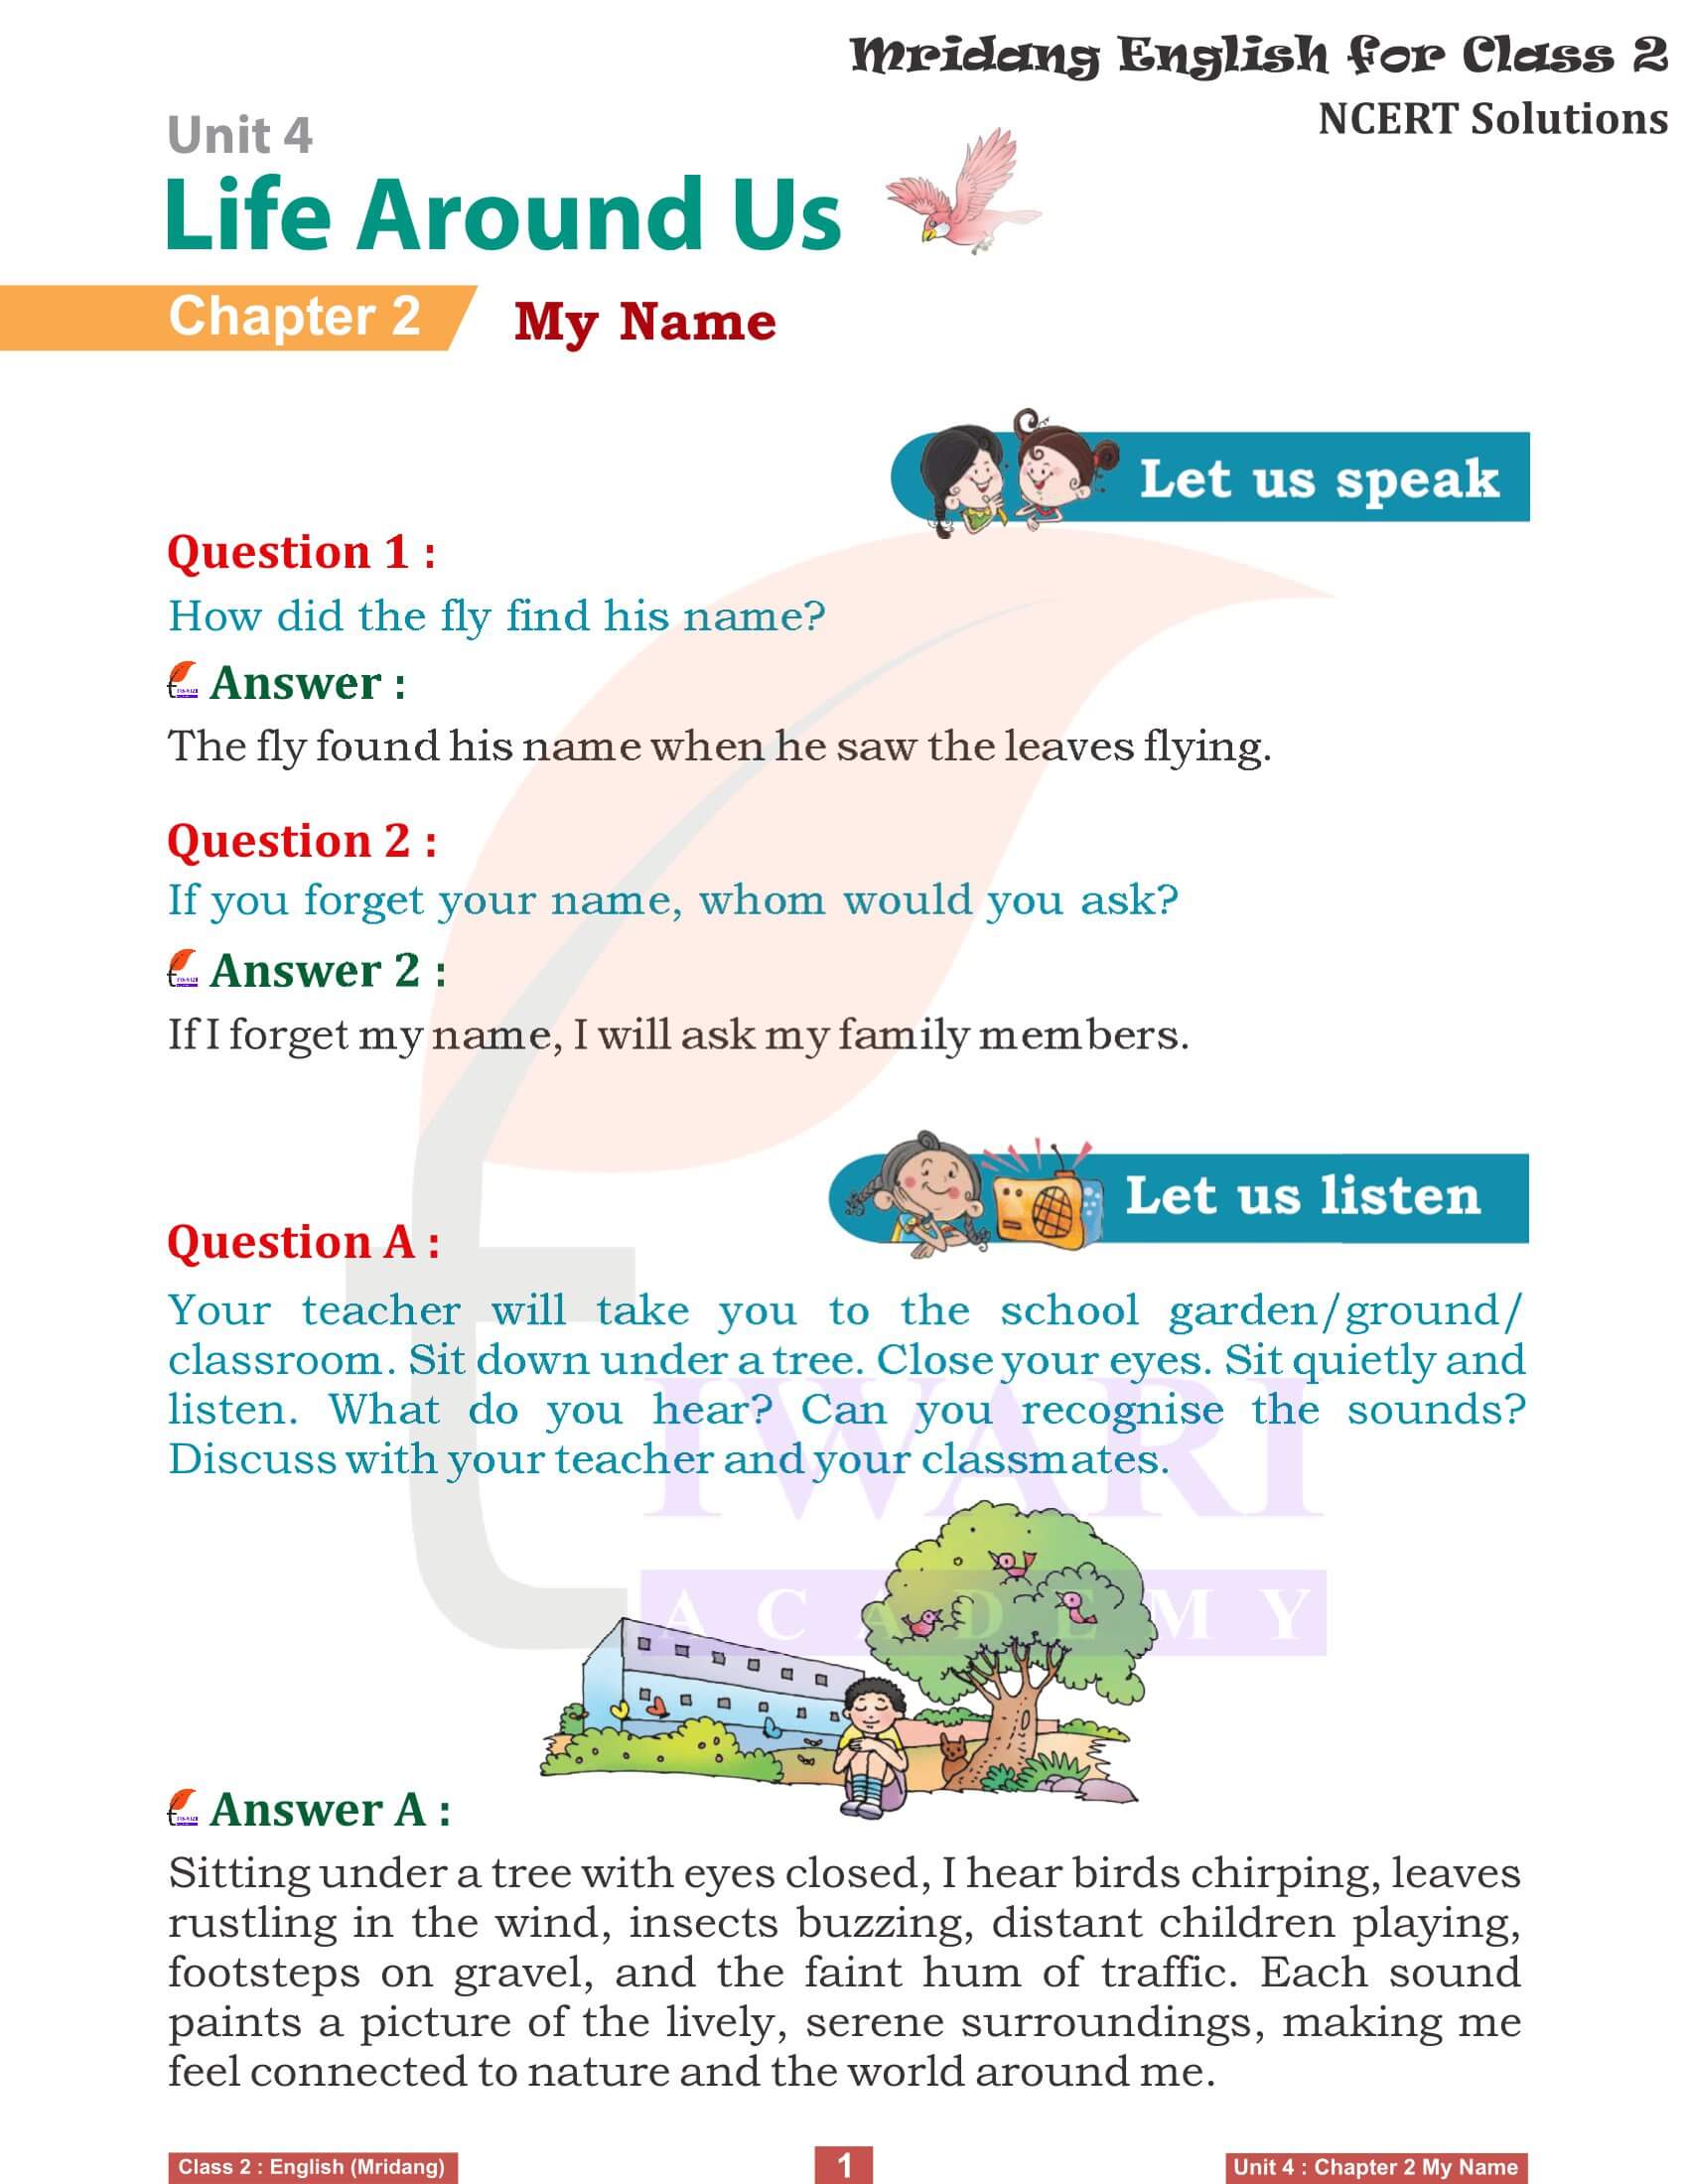 NCERT Solutions for Class 2 English Mridang Unit 4 Life Around Us Chapter 2 My Name